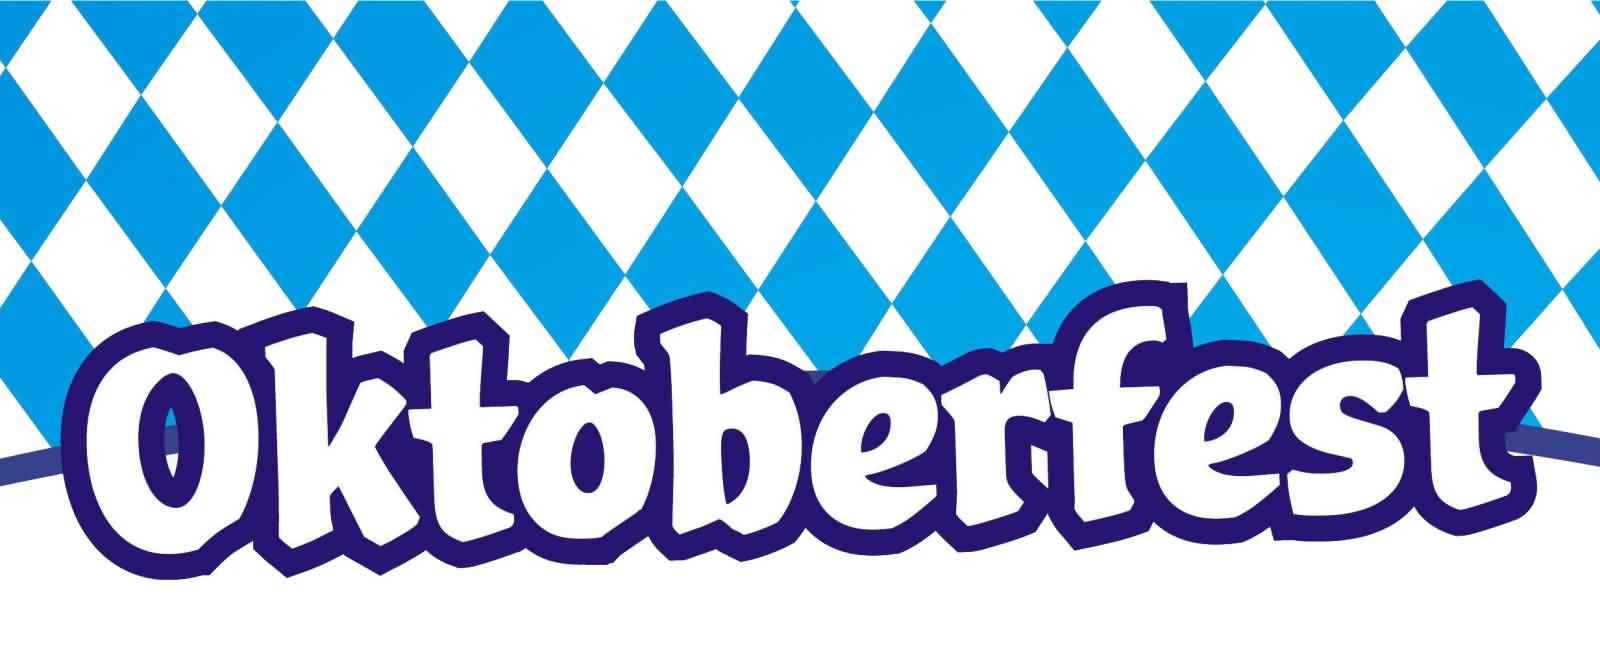 50 Best Oktoberfest 2017 Greeting Pictures And Images